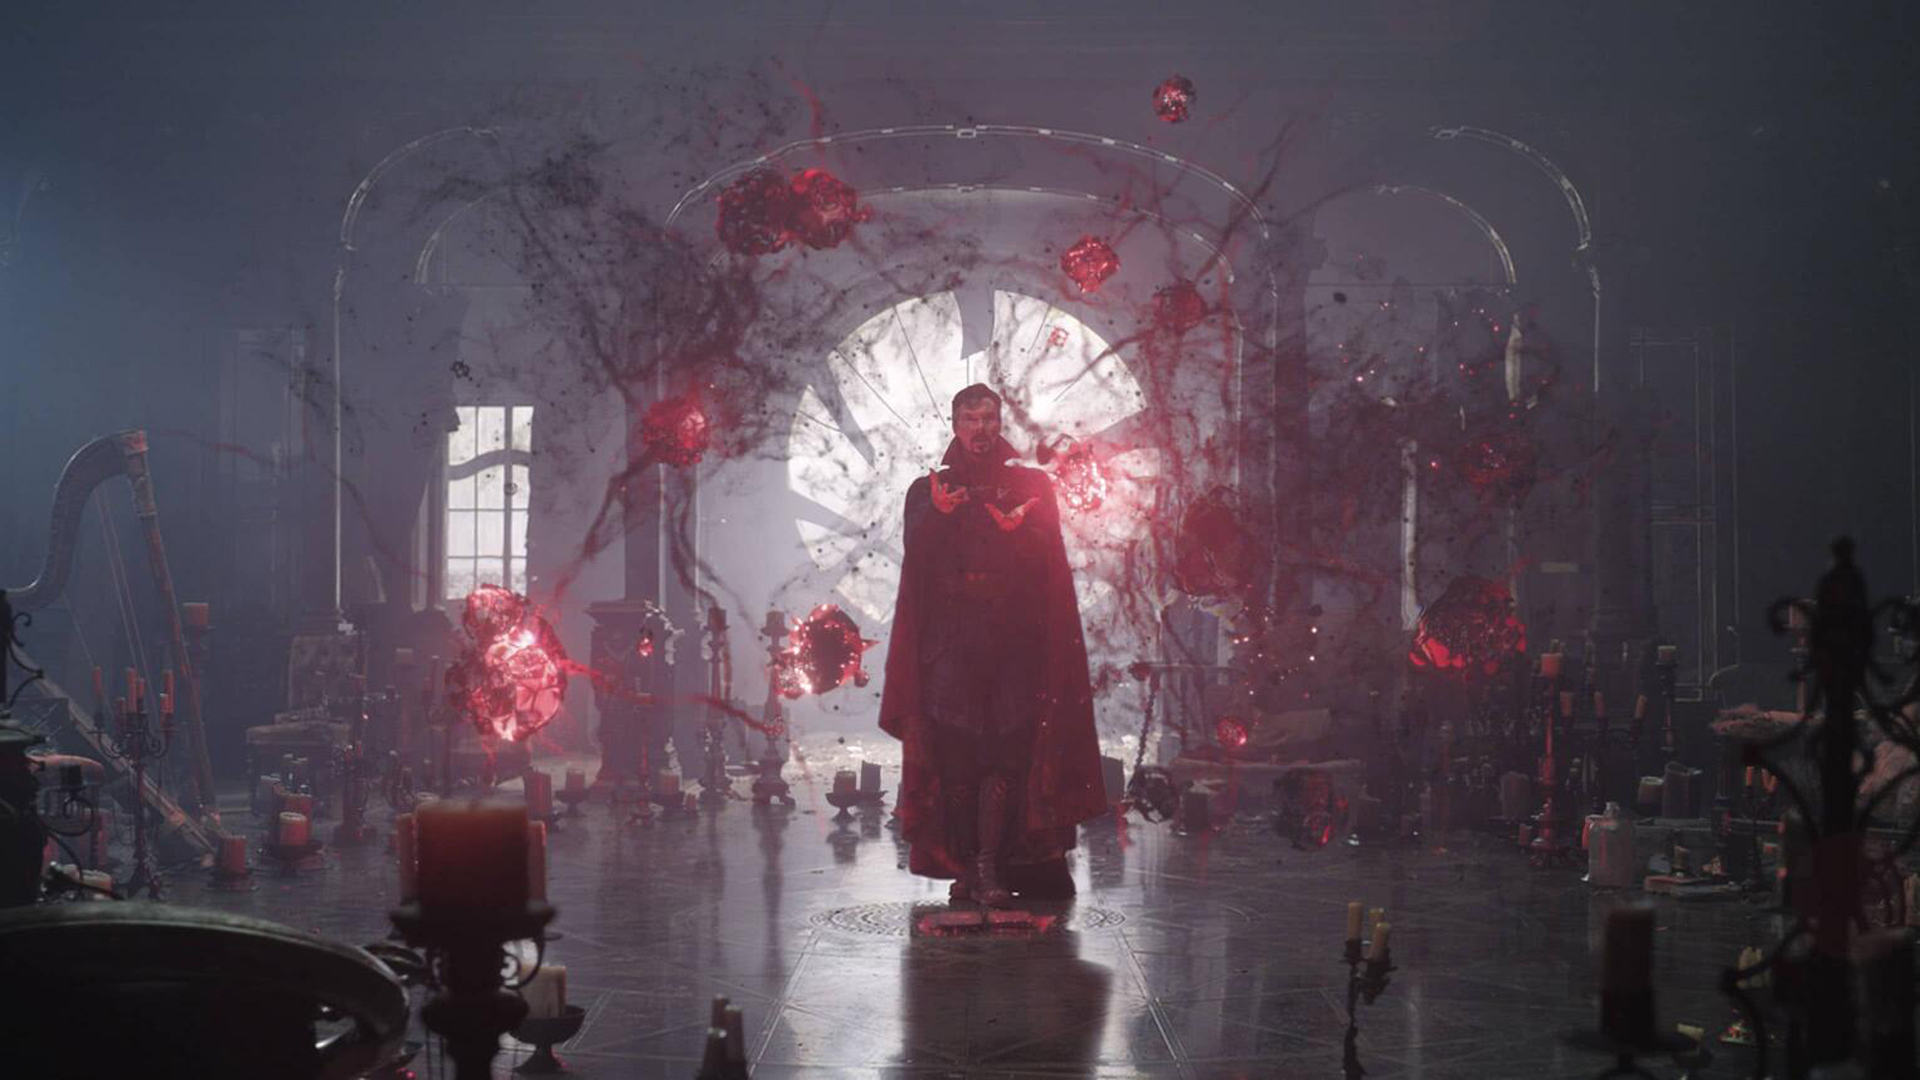 Doctor Strange casts a spell in Doctor Strange in the Multiverse of Madness